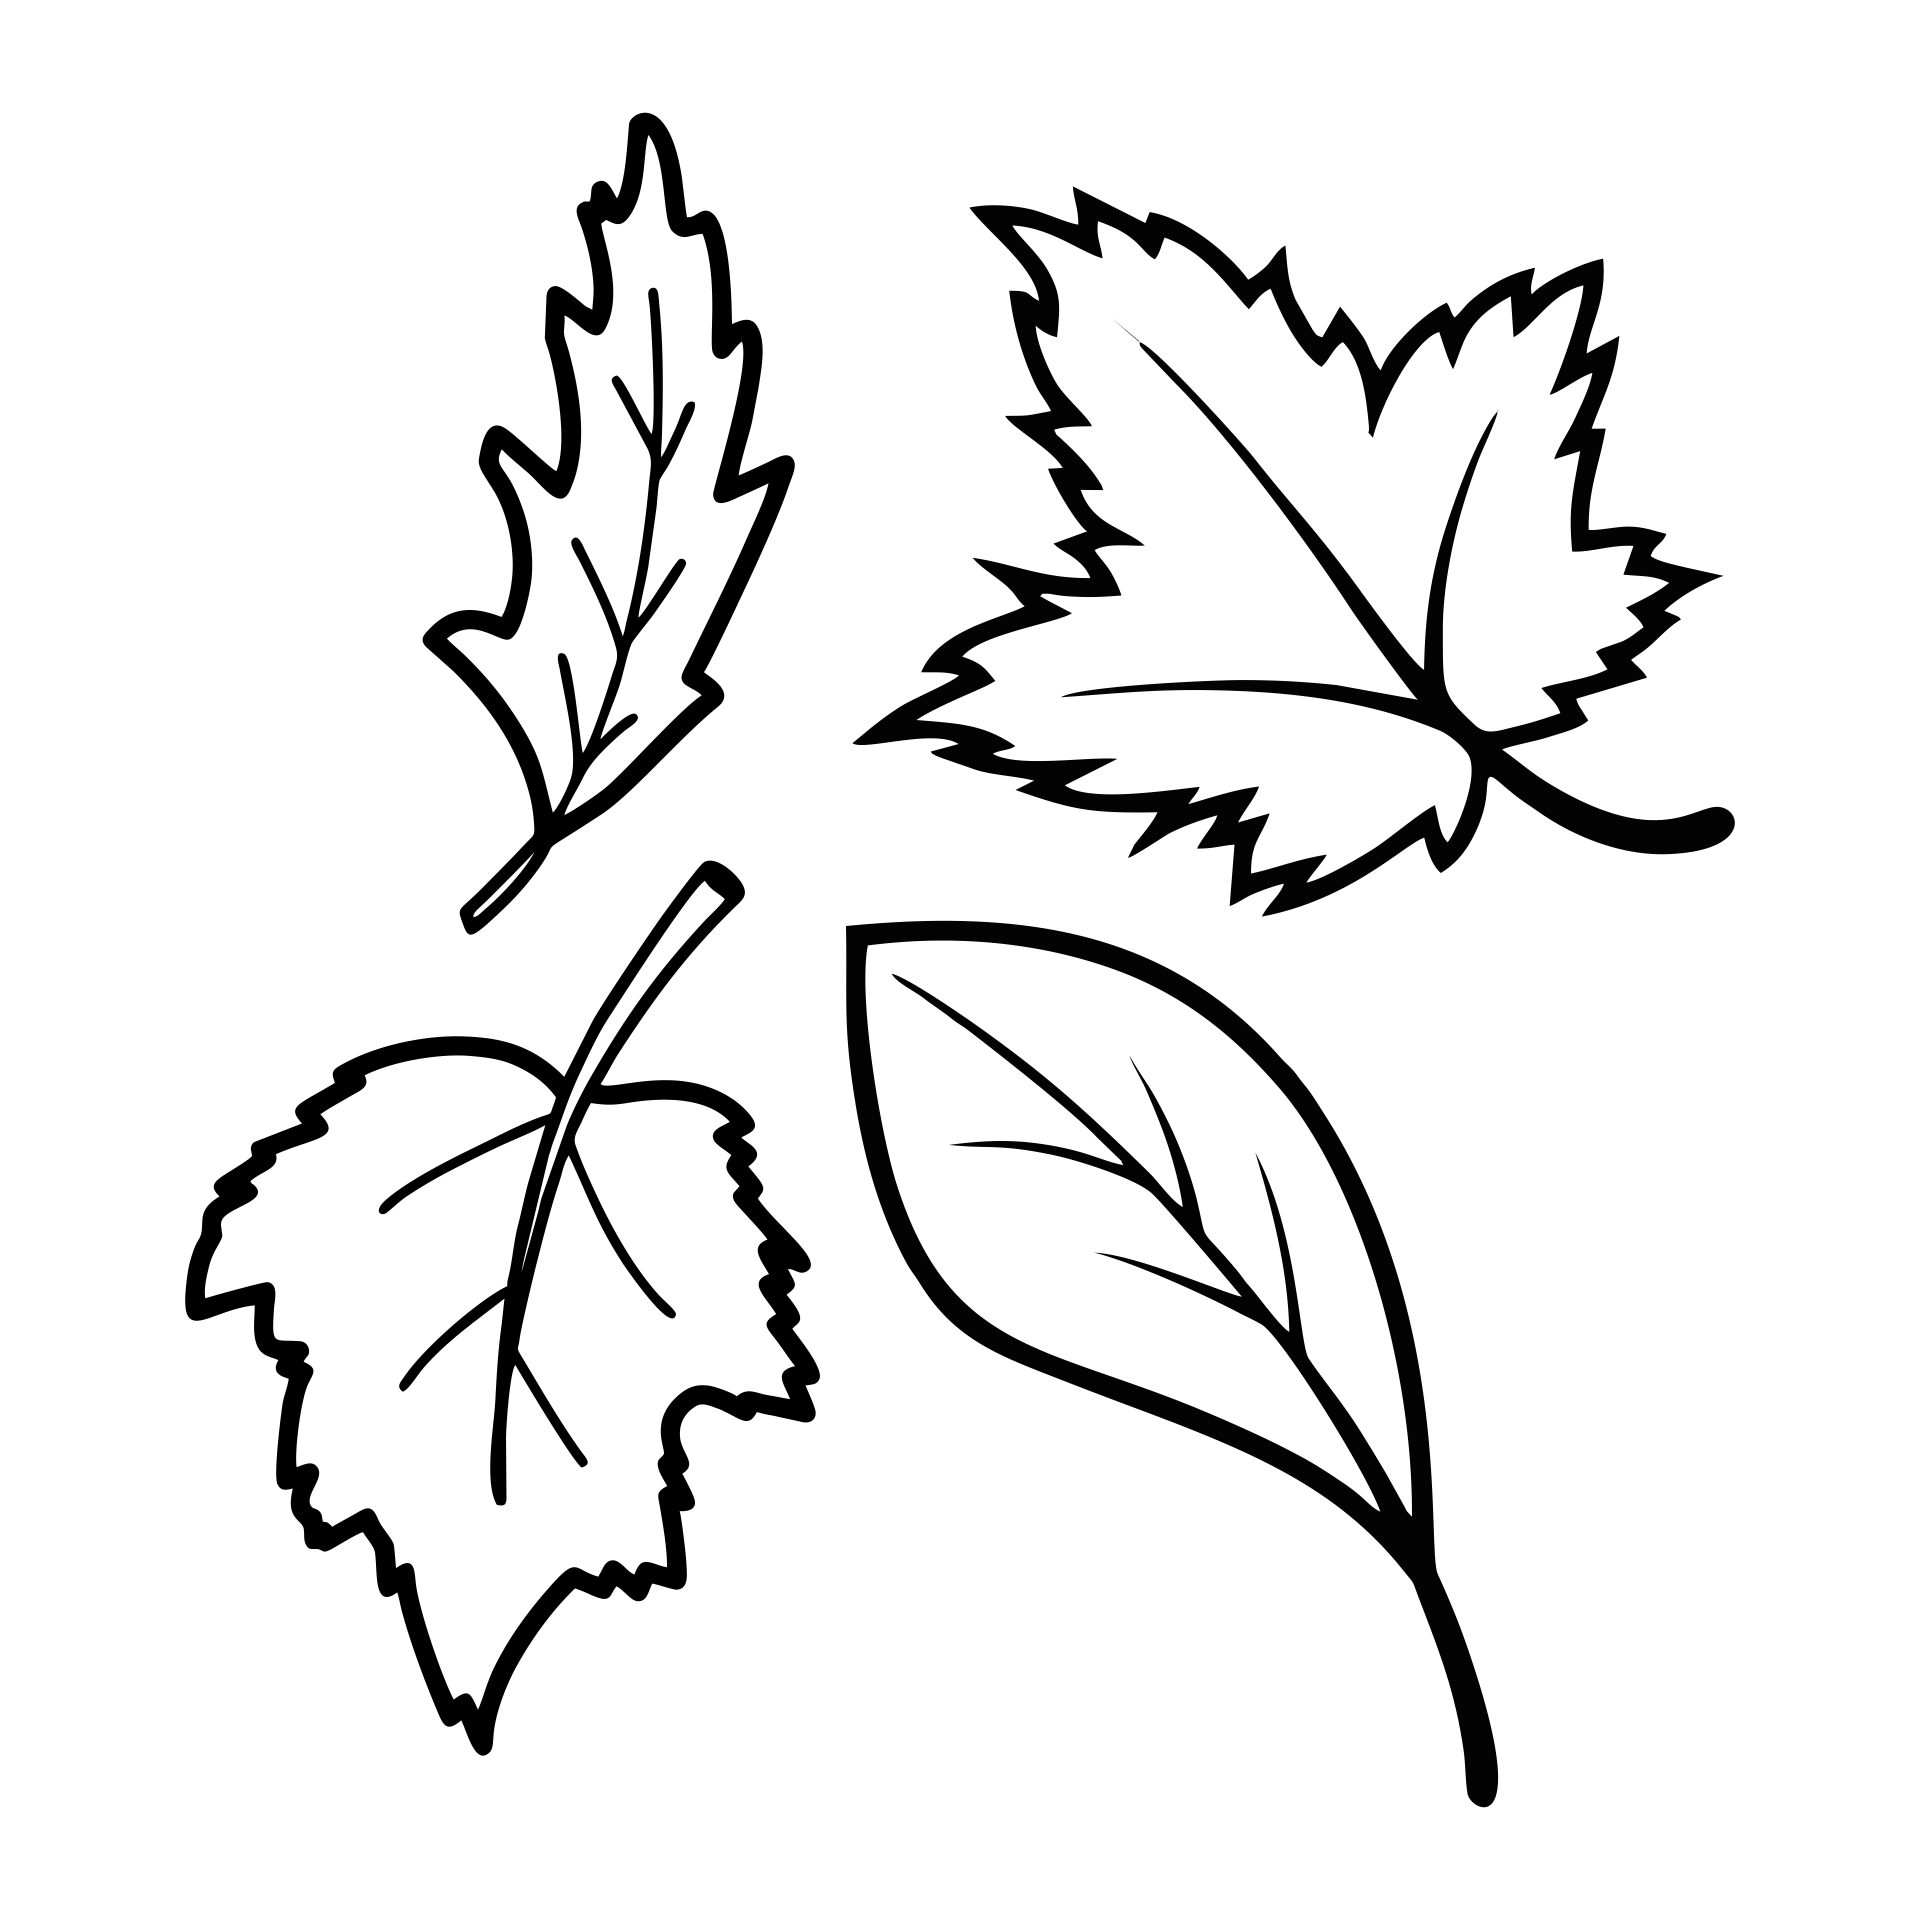 7 Best Images of Fall Leaves Worksheets Printables - Fall Leaf Coloring